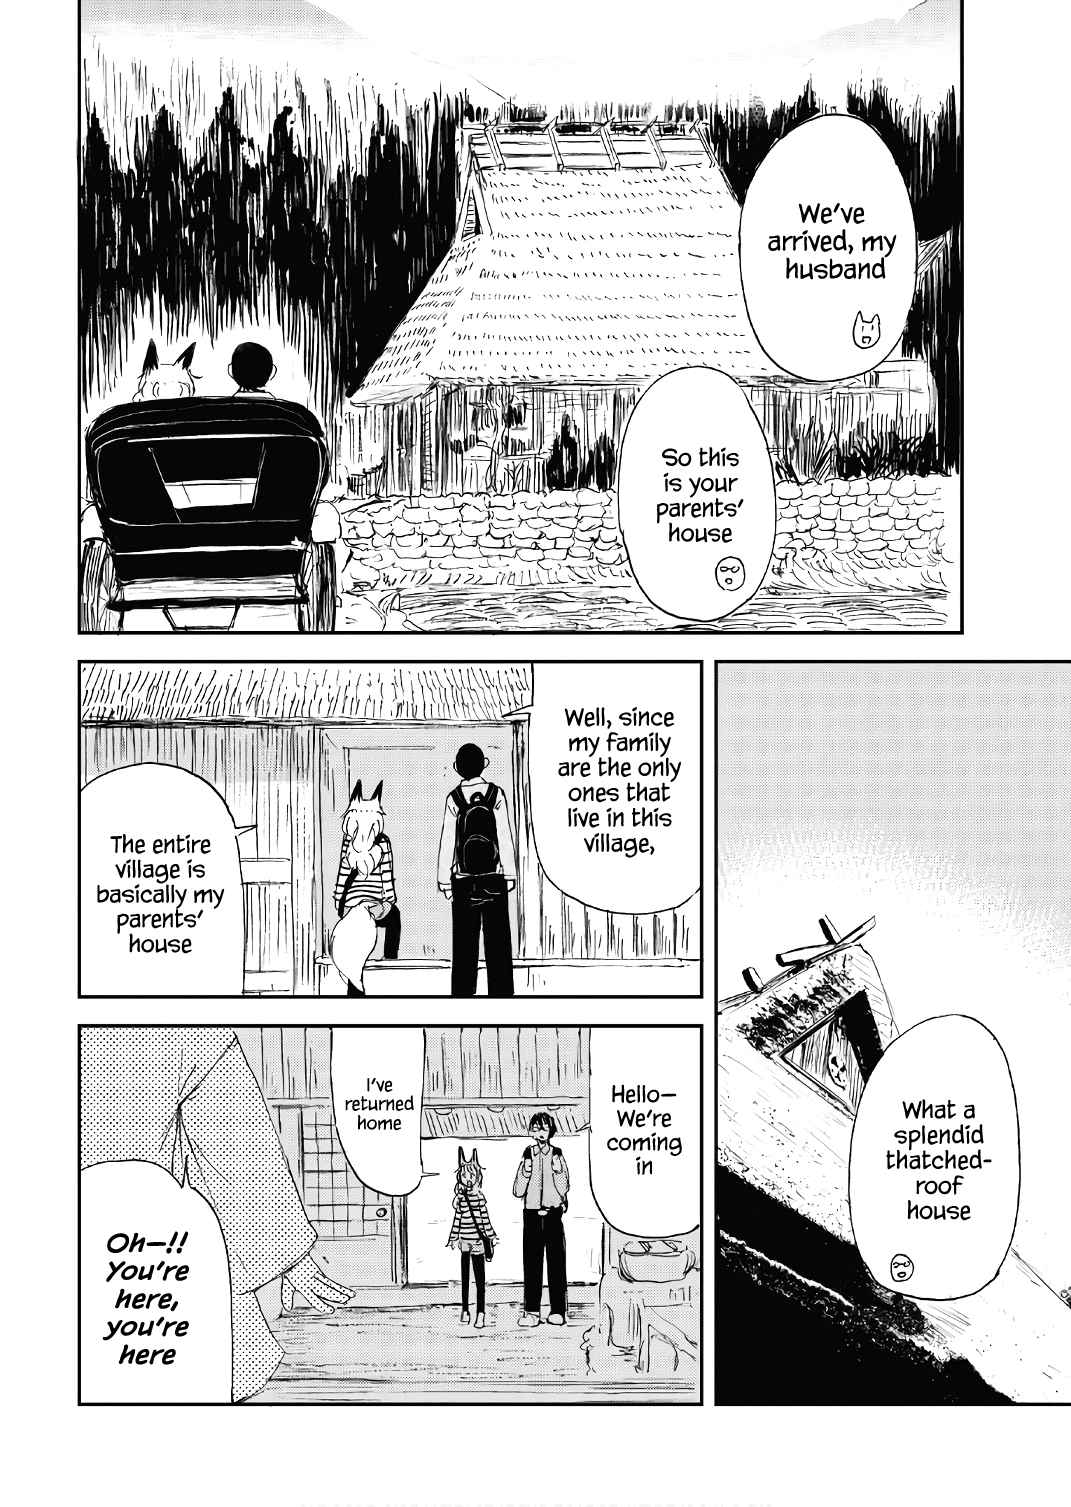 Kitsune no Oyome chan Vol. 2 Ch. 12 Going to Oyome chan's Parents' Home, Part 1